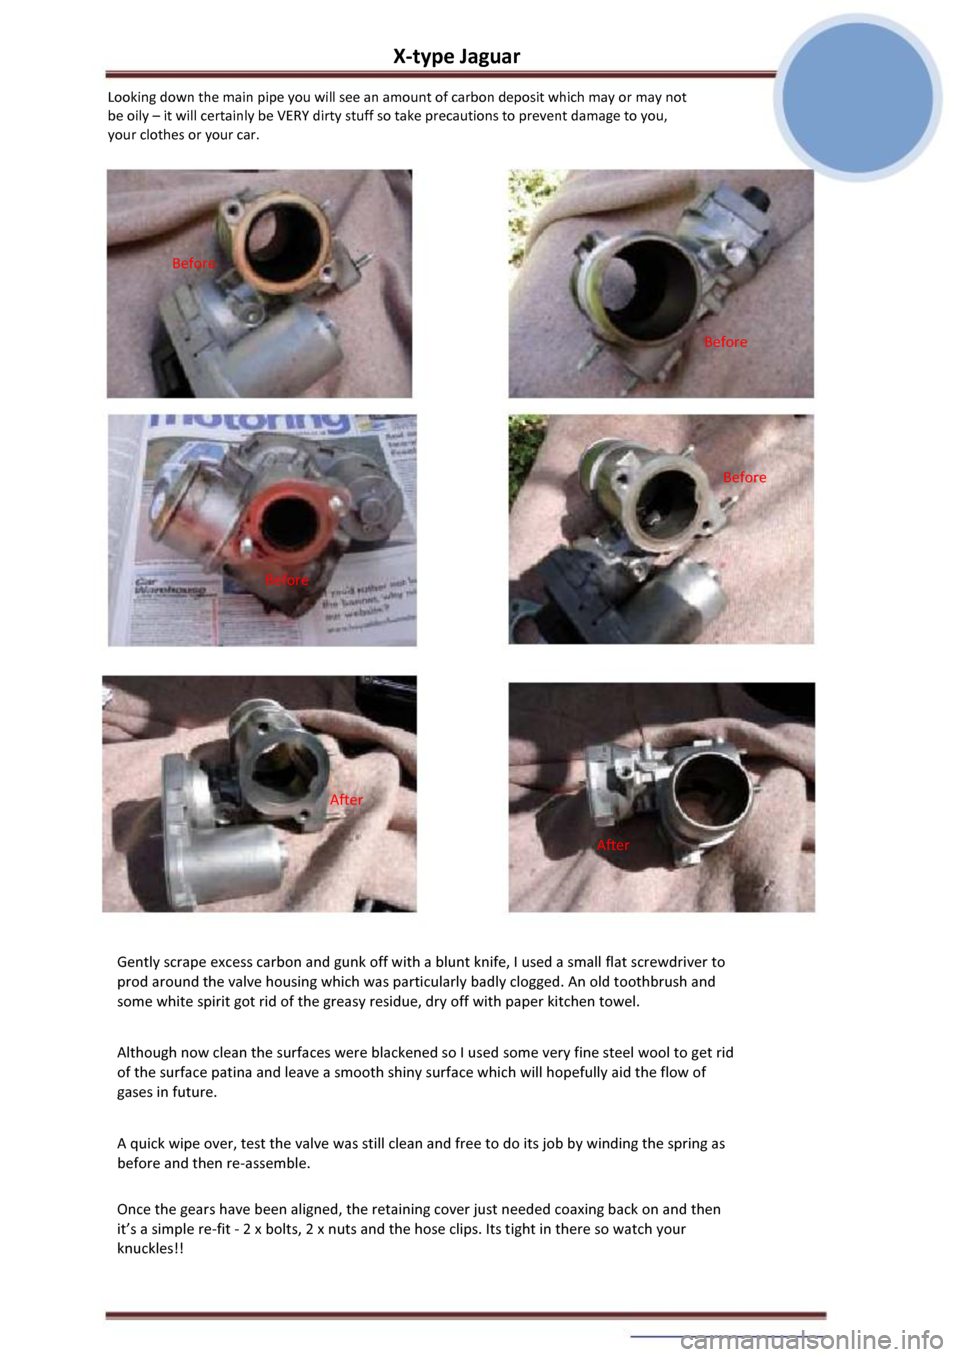 JAGUAR X TYPE 2004 1.G EGR Cleaning Manual X-type Jaguar 
Looking down the main pipe you will see an amount of carbon deposit which may or may not 
be oily – it will certainly be VERY dirty stuff so take precautions to prevent damage to you,